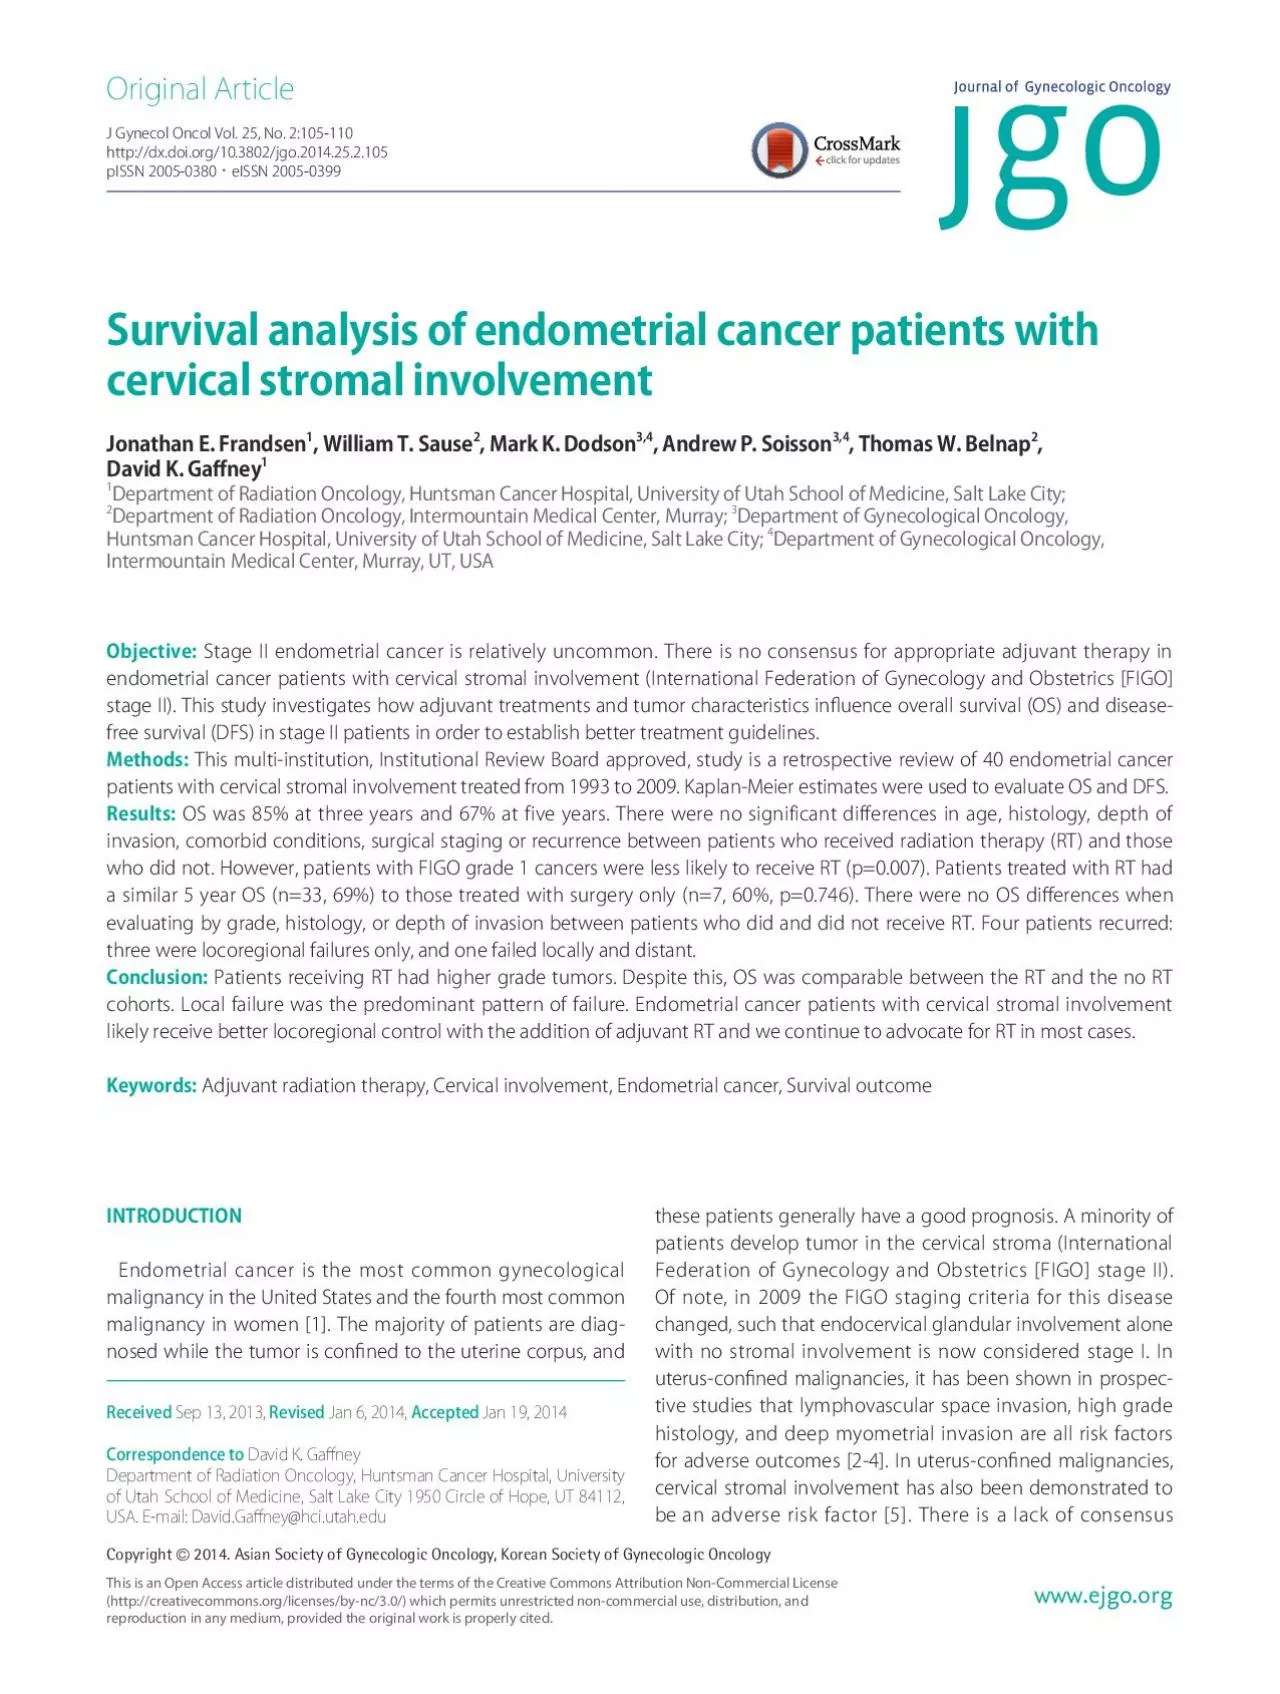 Endometrial cancer is the most common gynecological